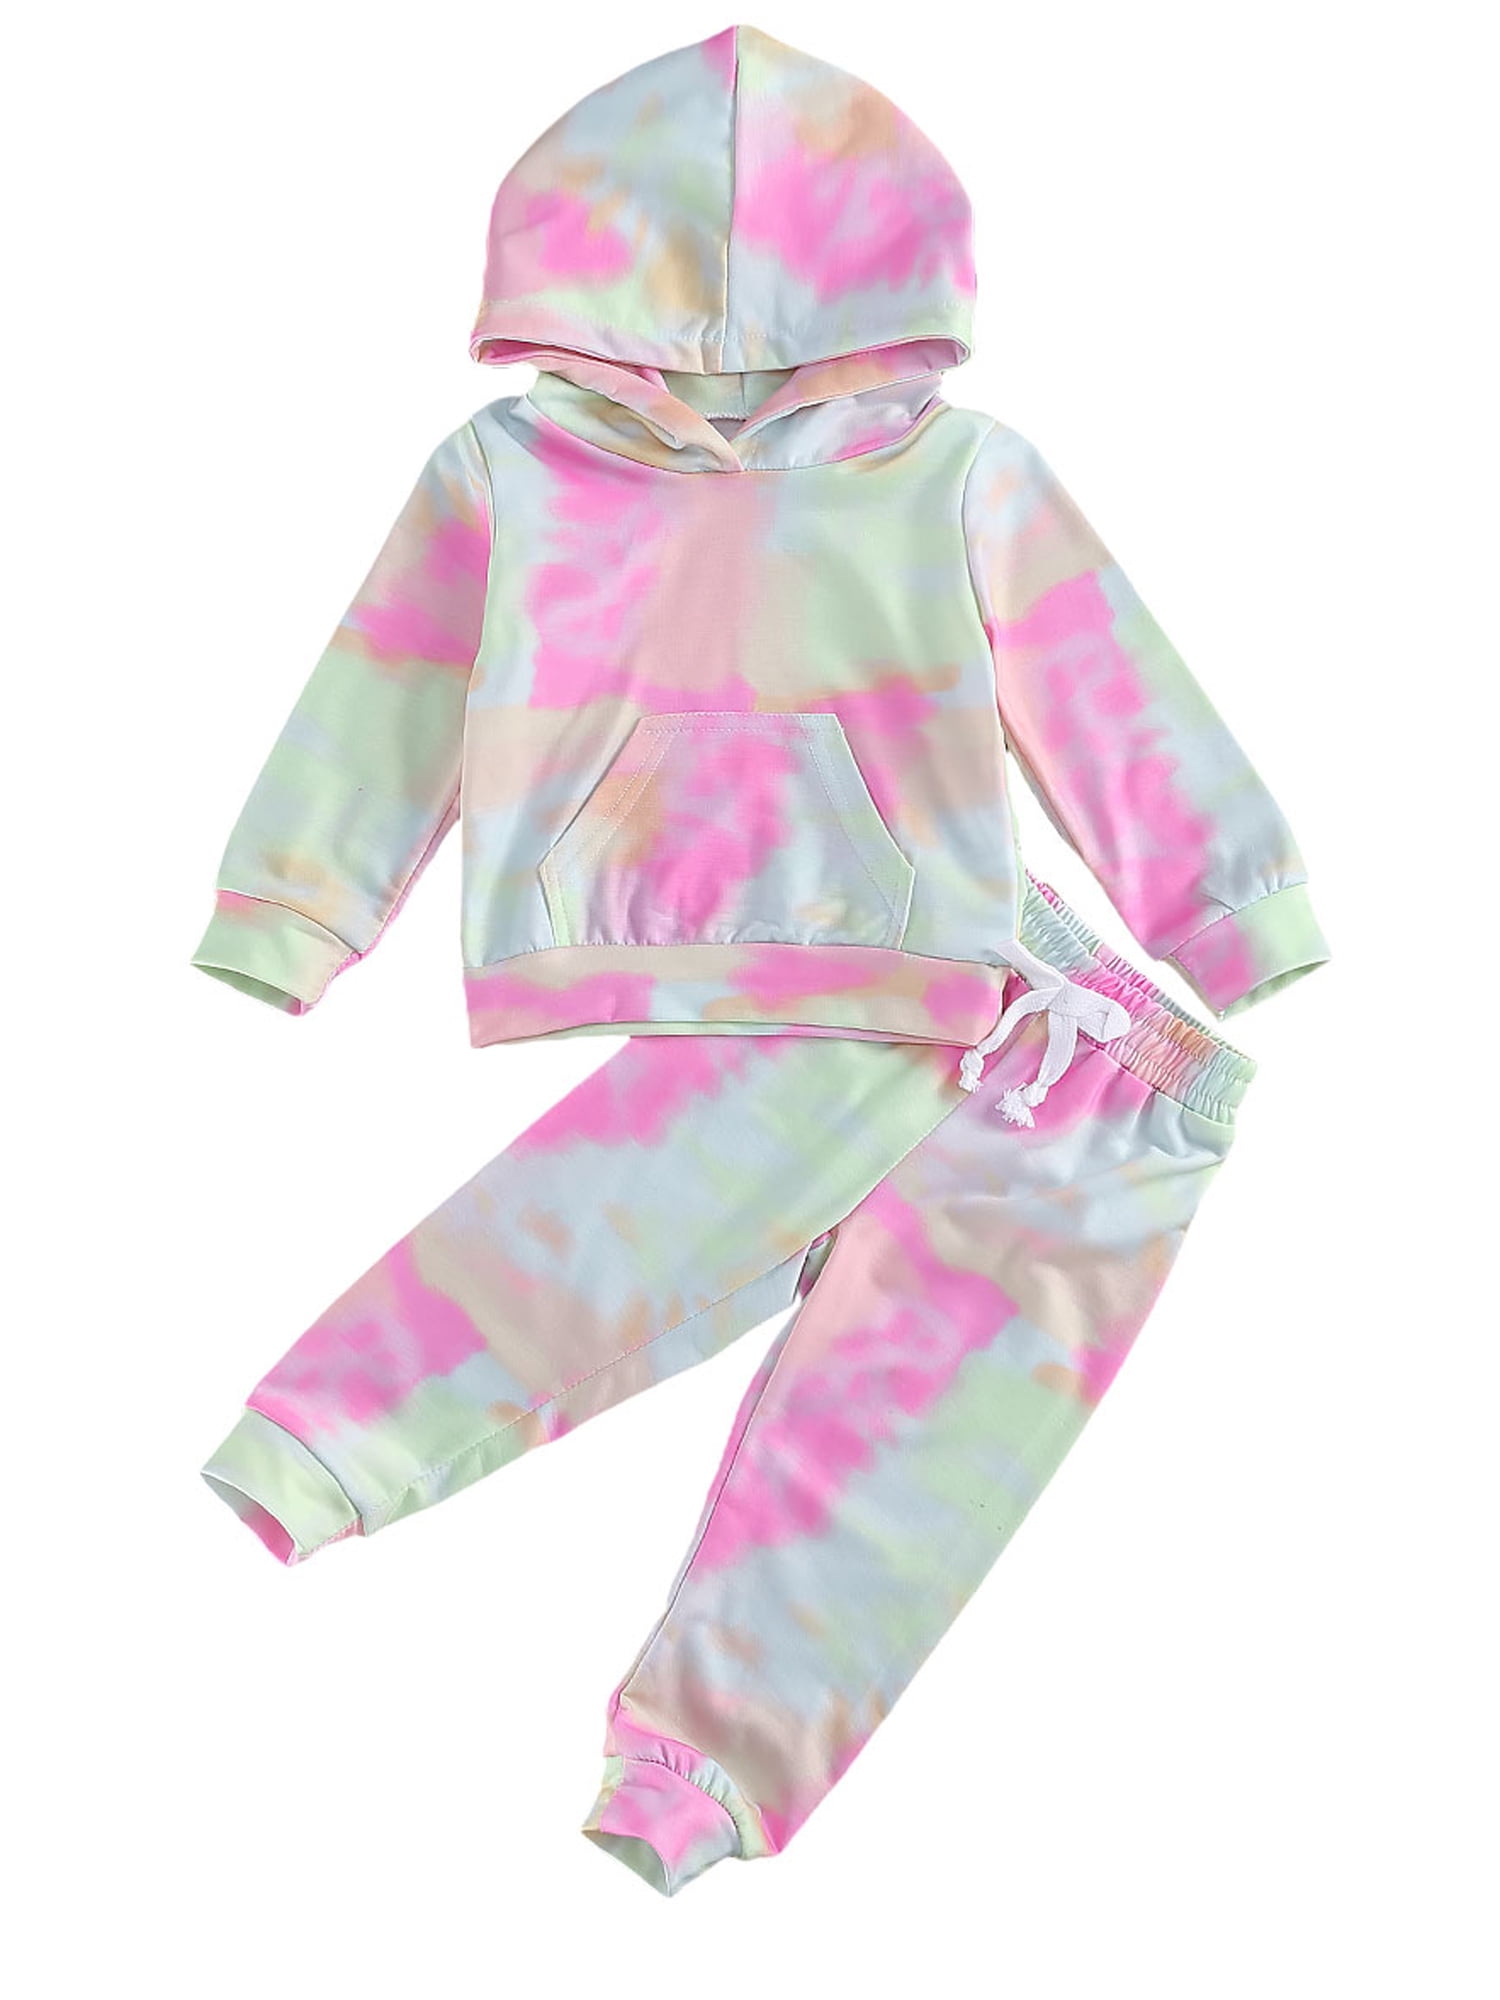 NEW Tie Dye Pink Hooded Sweatshirt Track Suit Girls Outfit Set 2T 3T 4T 5T 